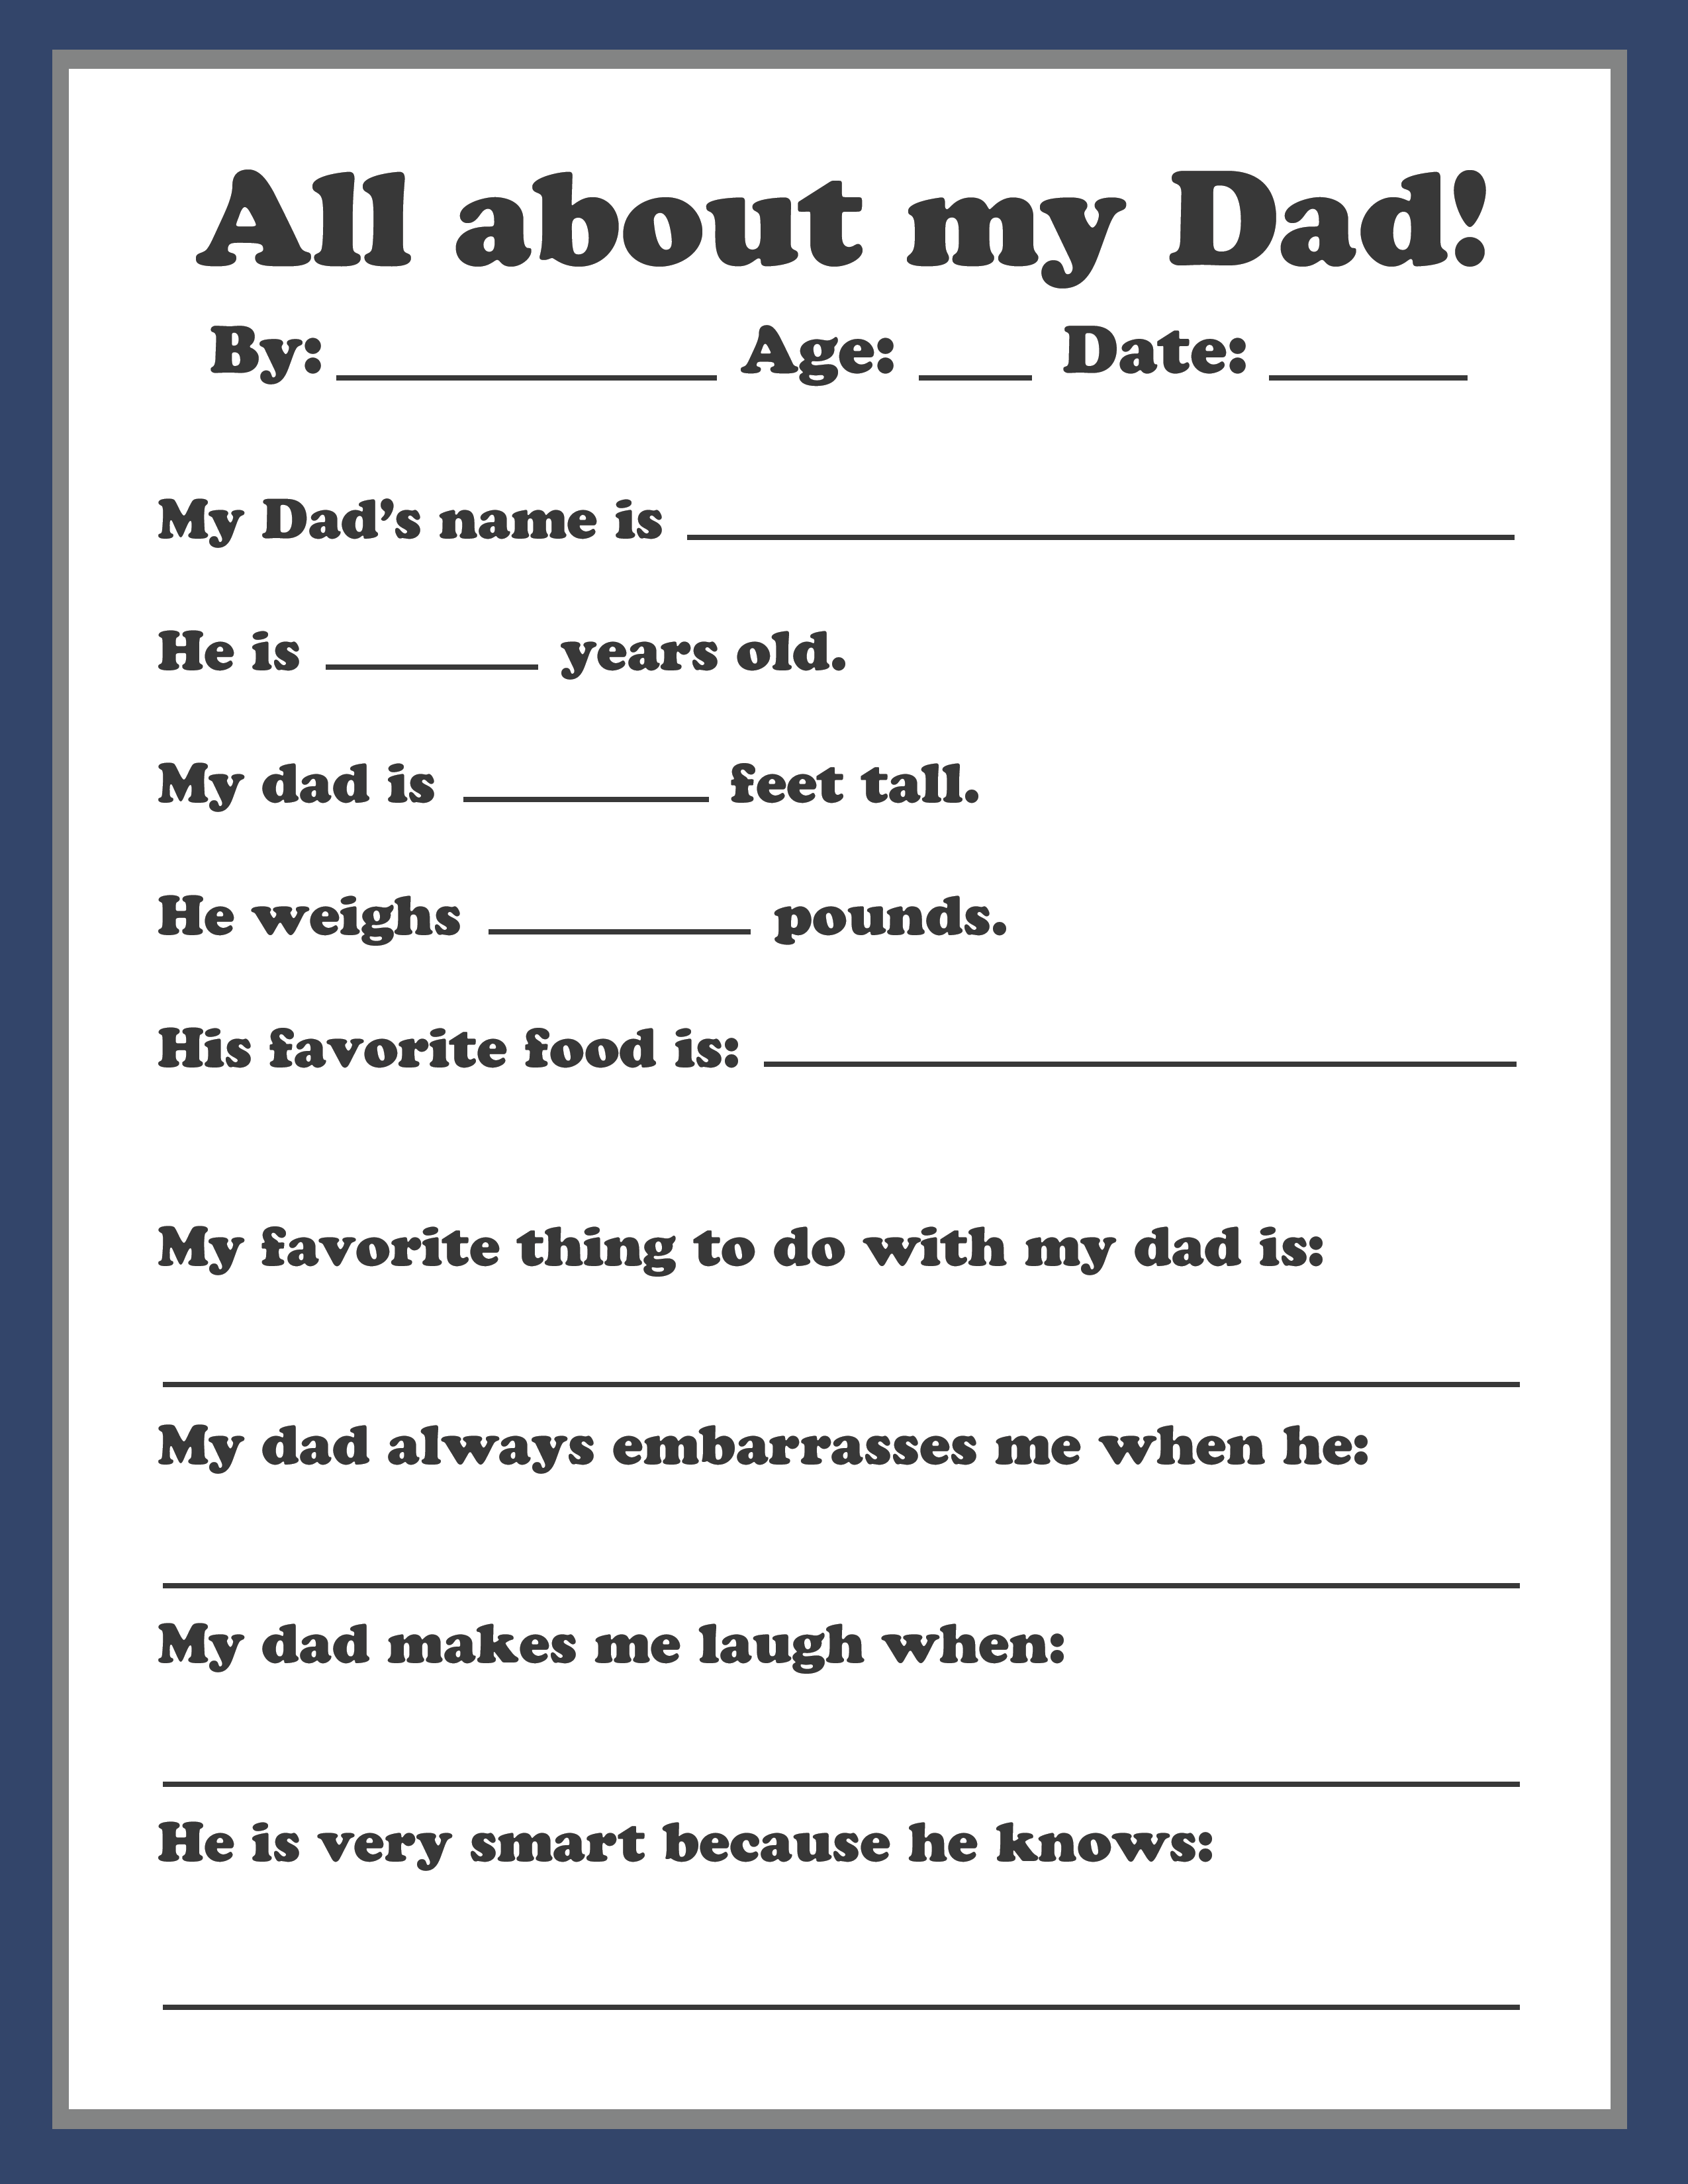 fathers-day-quiz-printable-fathers-day-printable-fathers-day-i